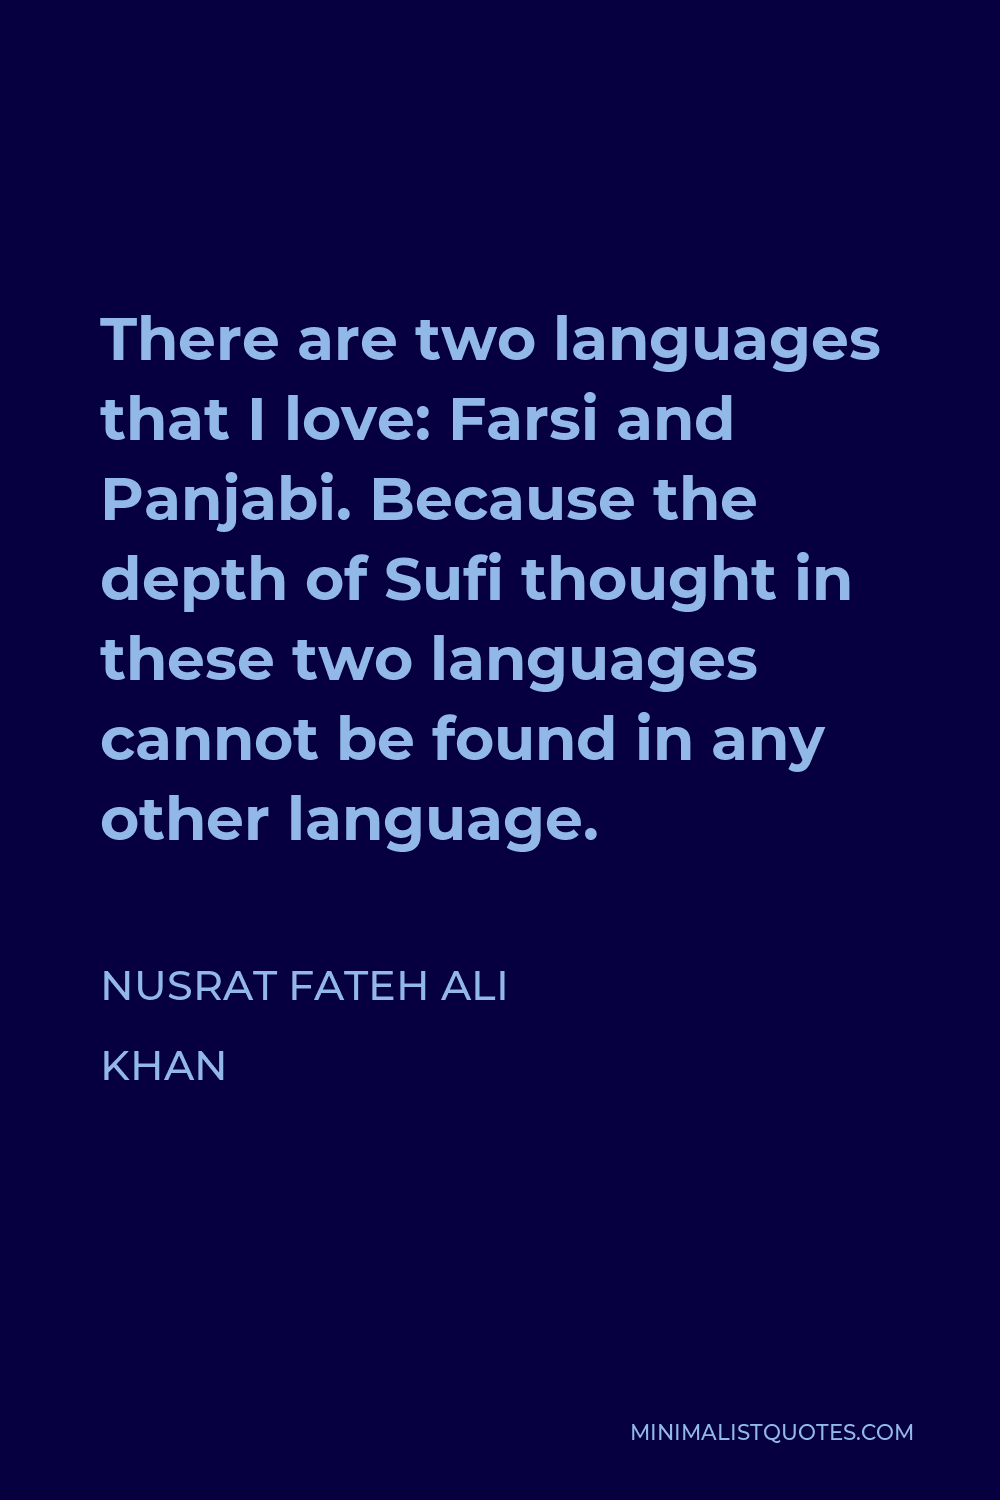 Nusrat Fateh Ali Khan Quote - There are two languages that I love: Farsi and Panjabi. Because the depth of Sufi thought in these two languages cannot be found in any other language.